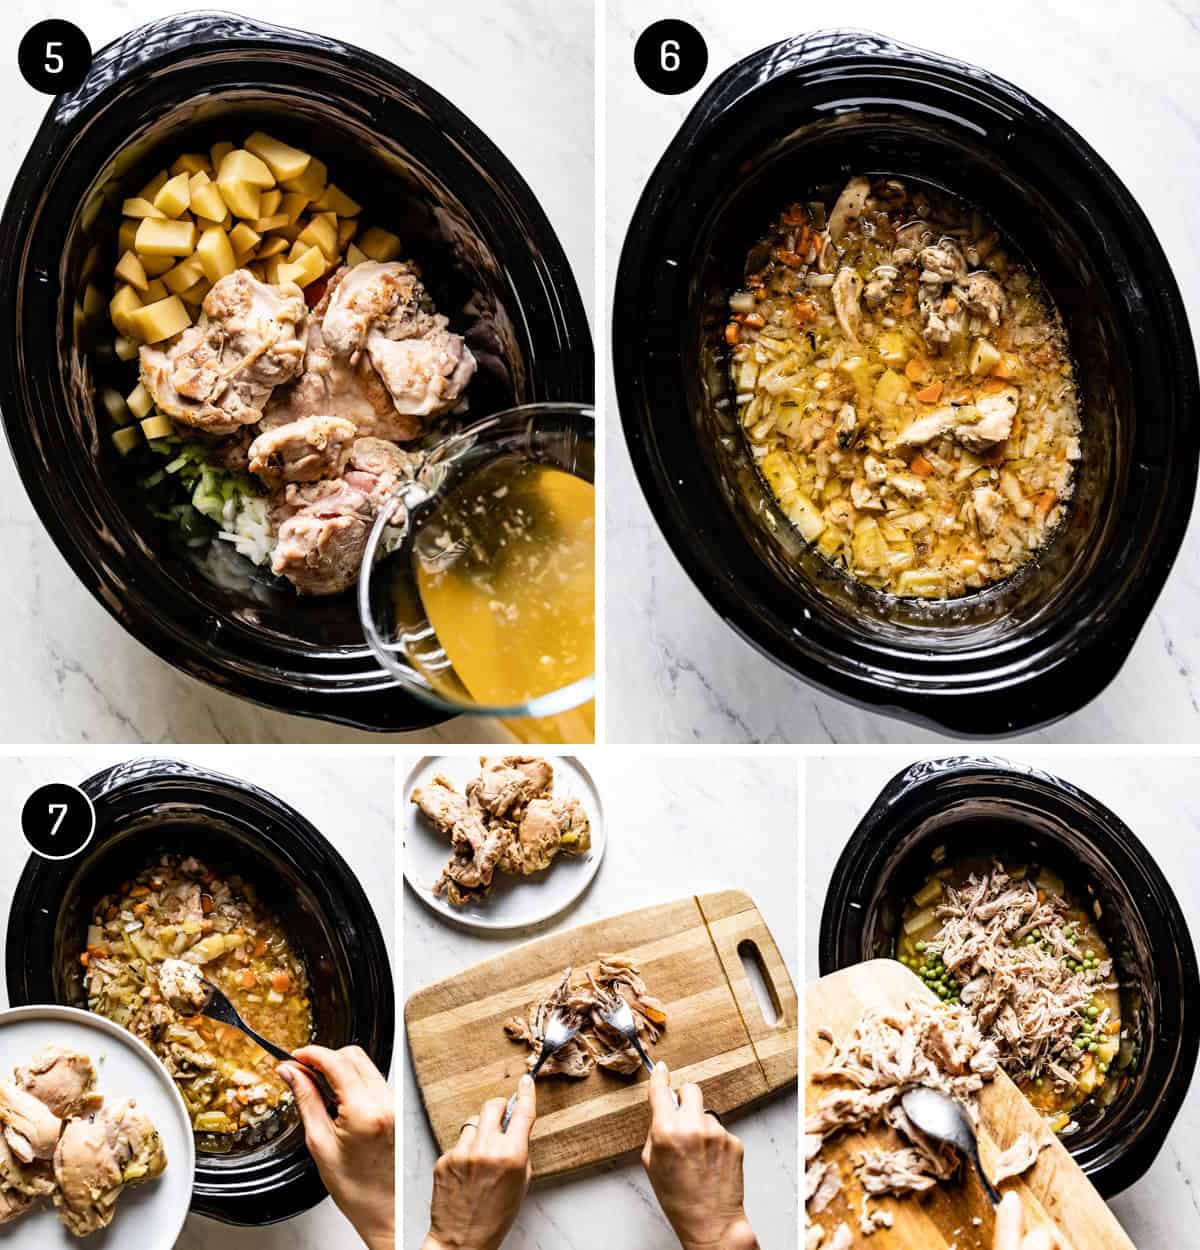 A collage of photos showing how to make crockpot chicken vegetable stew.